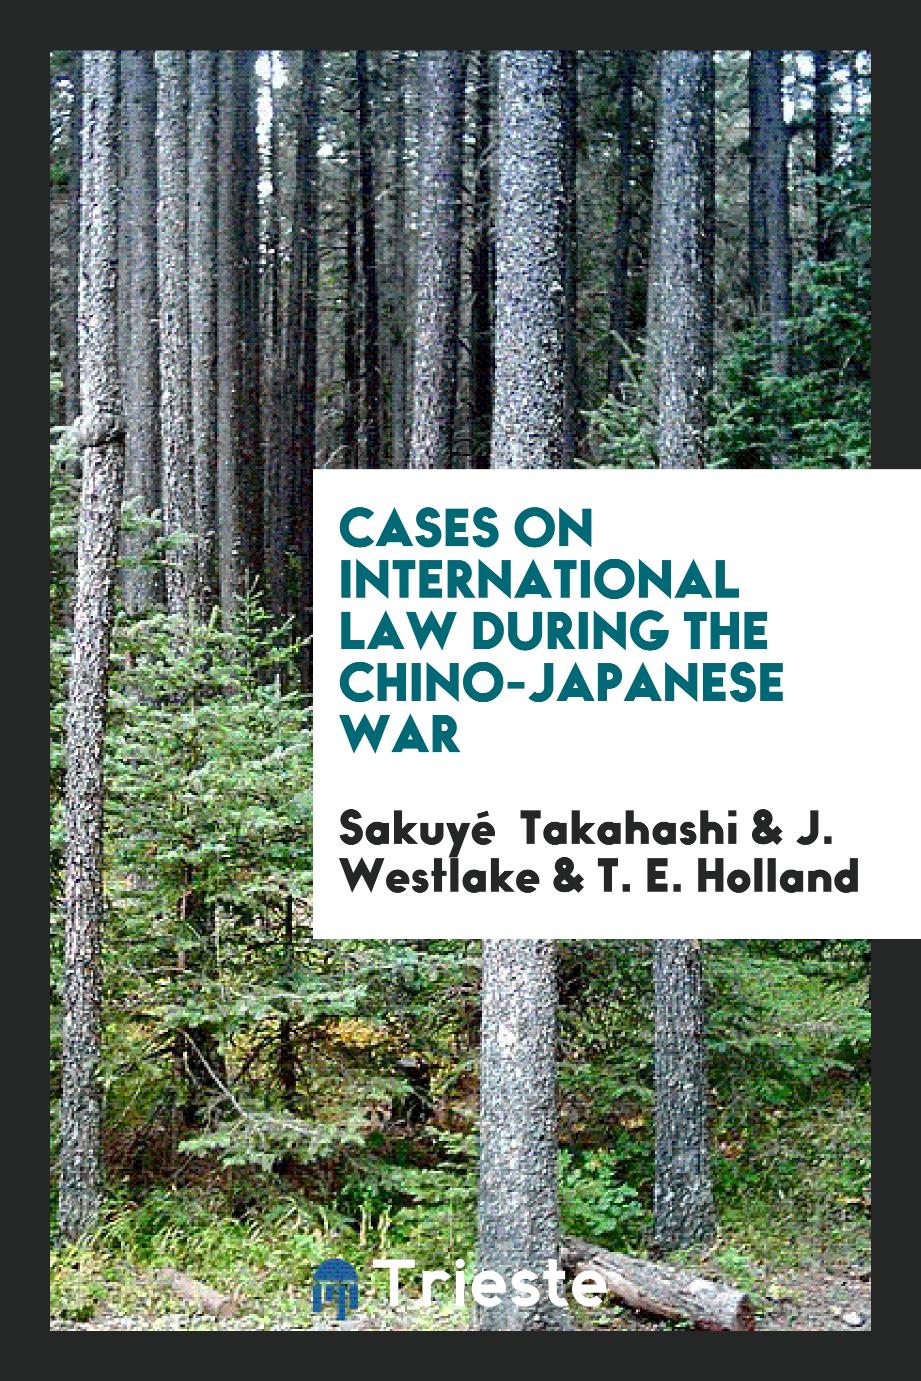 Cases on International Law during the Chino-Japanese War